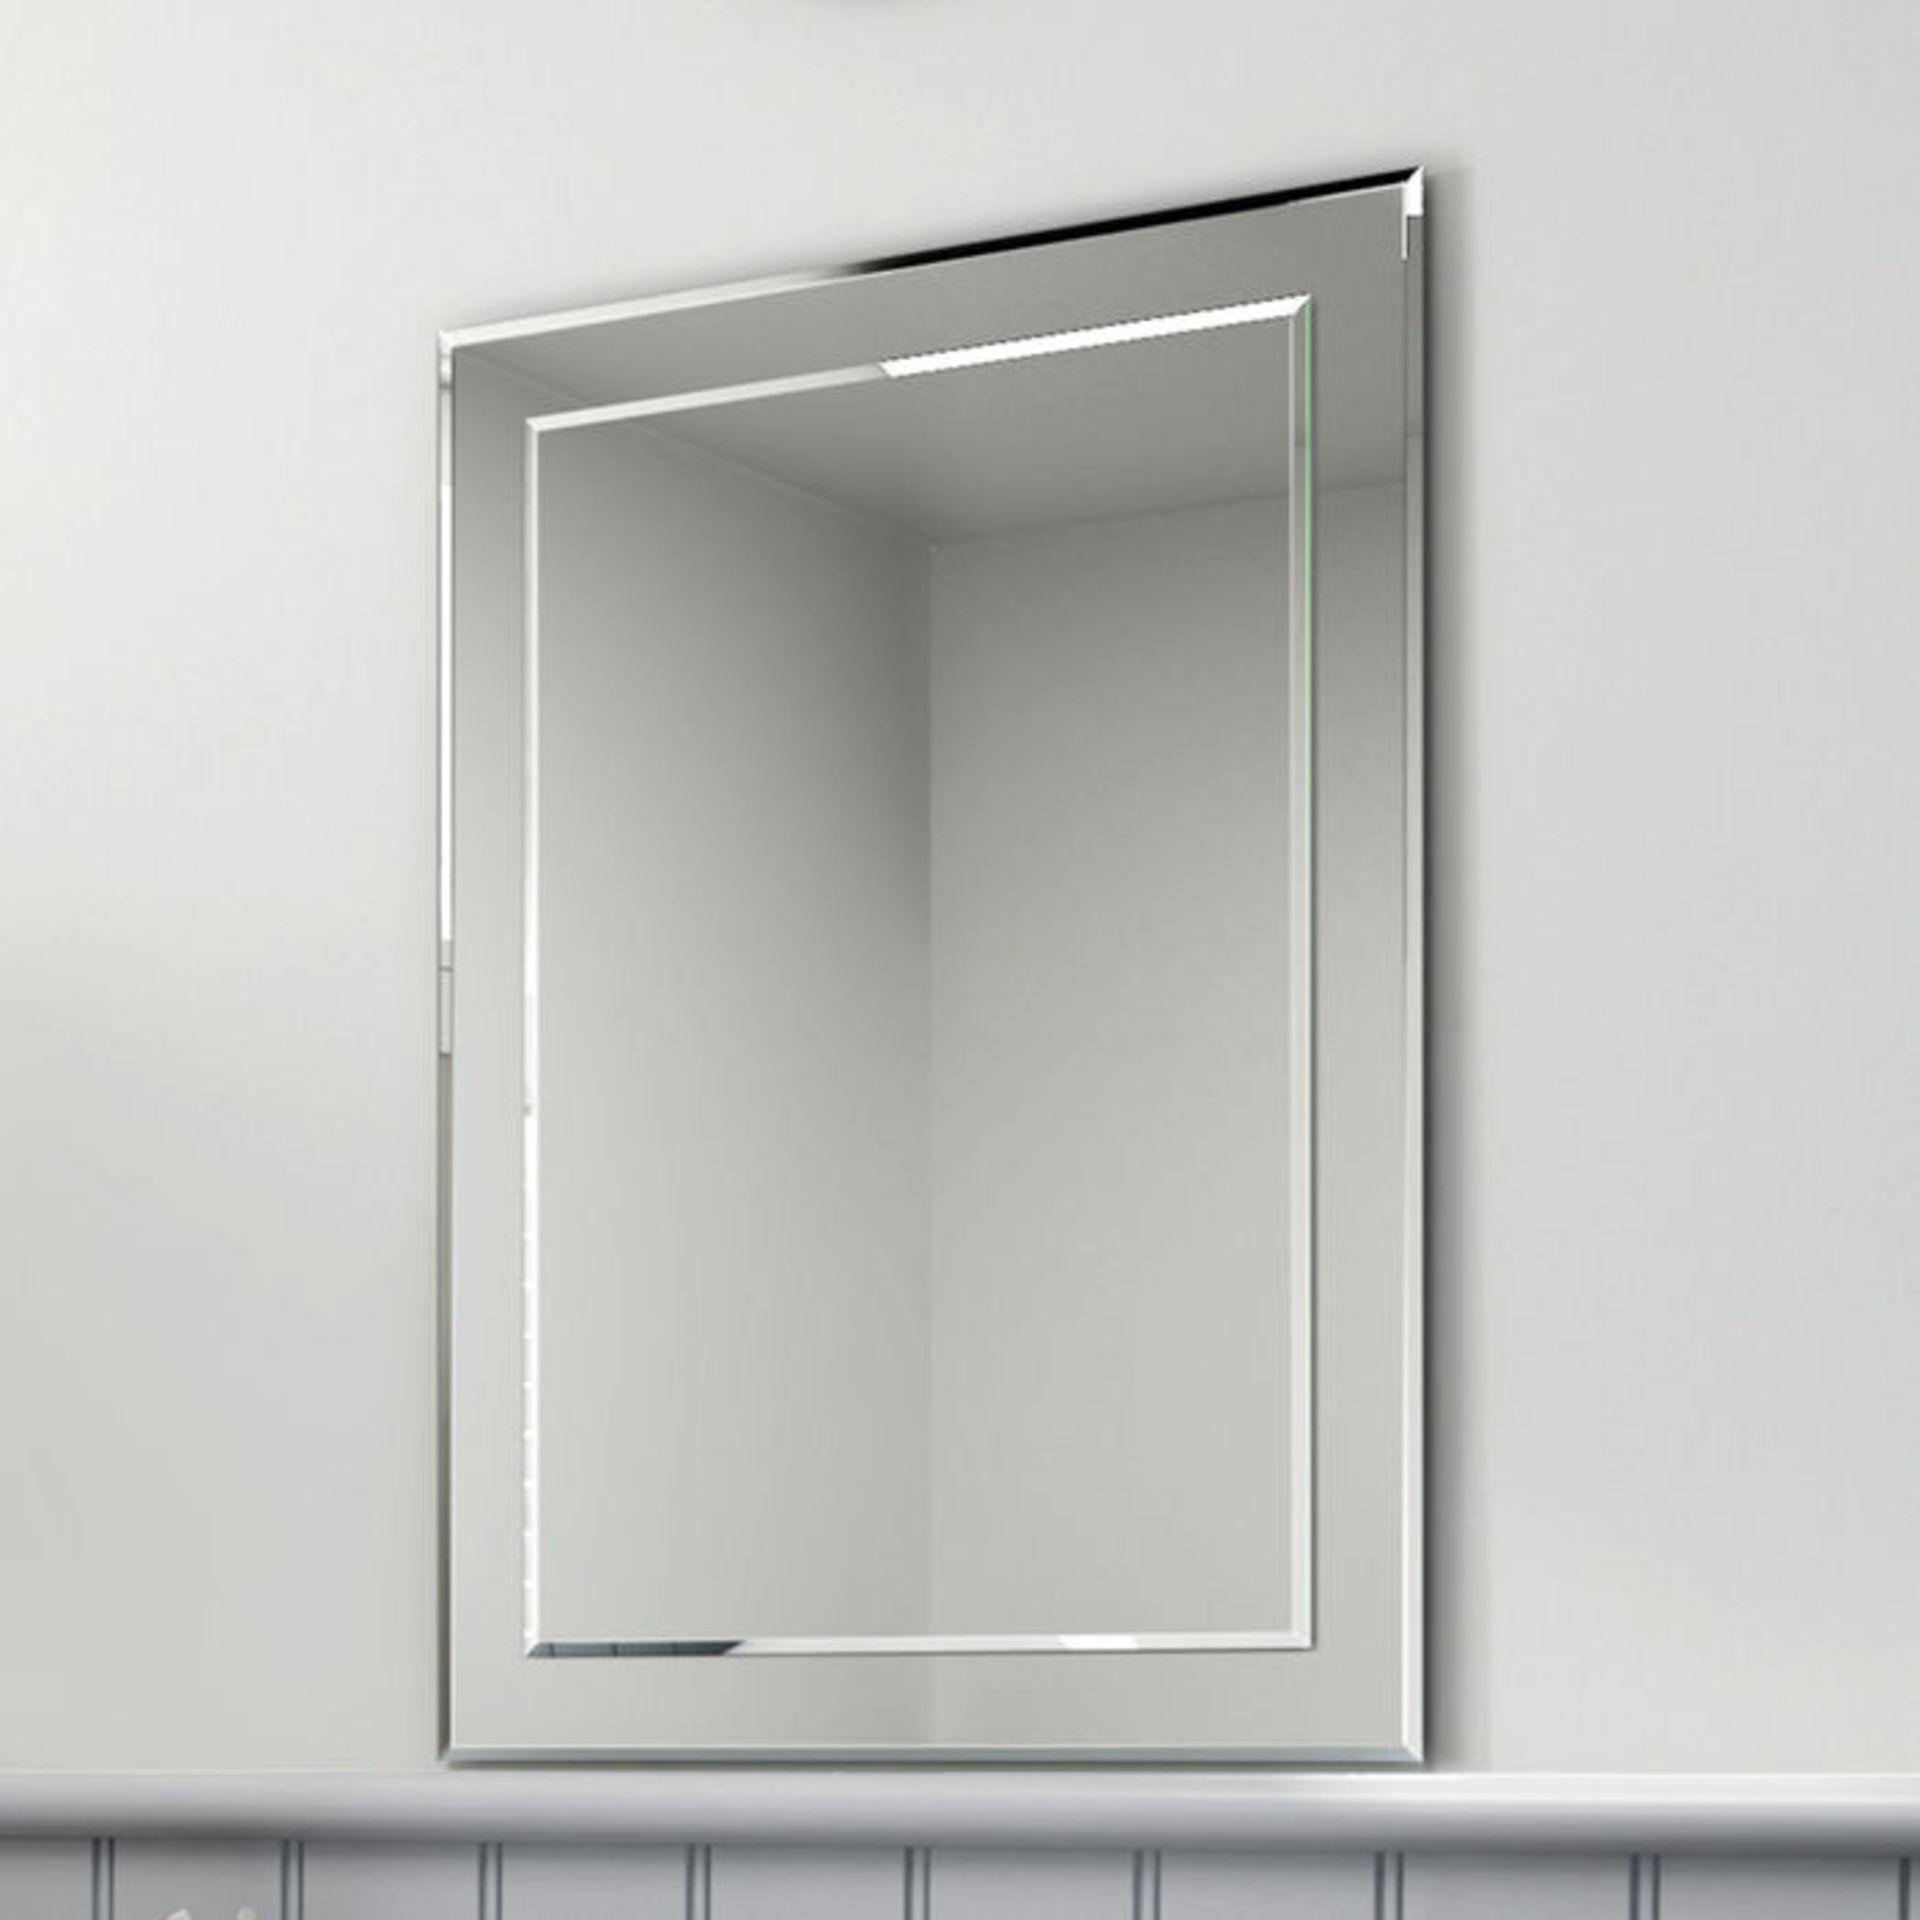 (W127) 500x700mm Bevel Mirror. Smooth beveled edge for additional safety and style Supplied fully